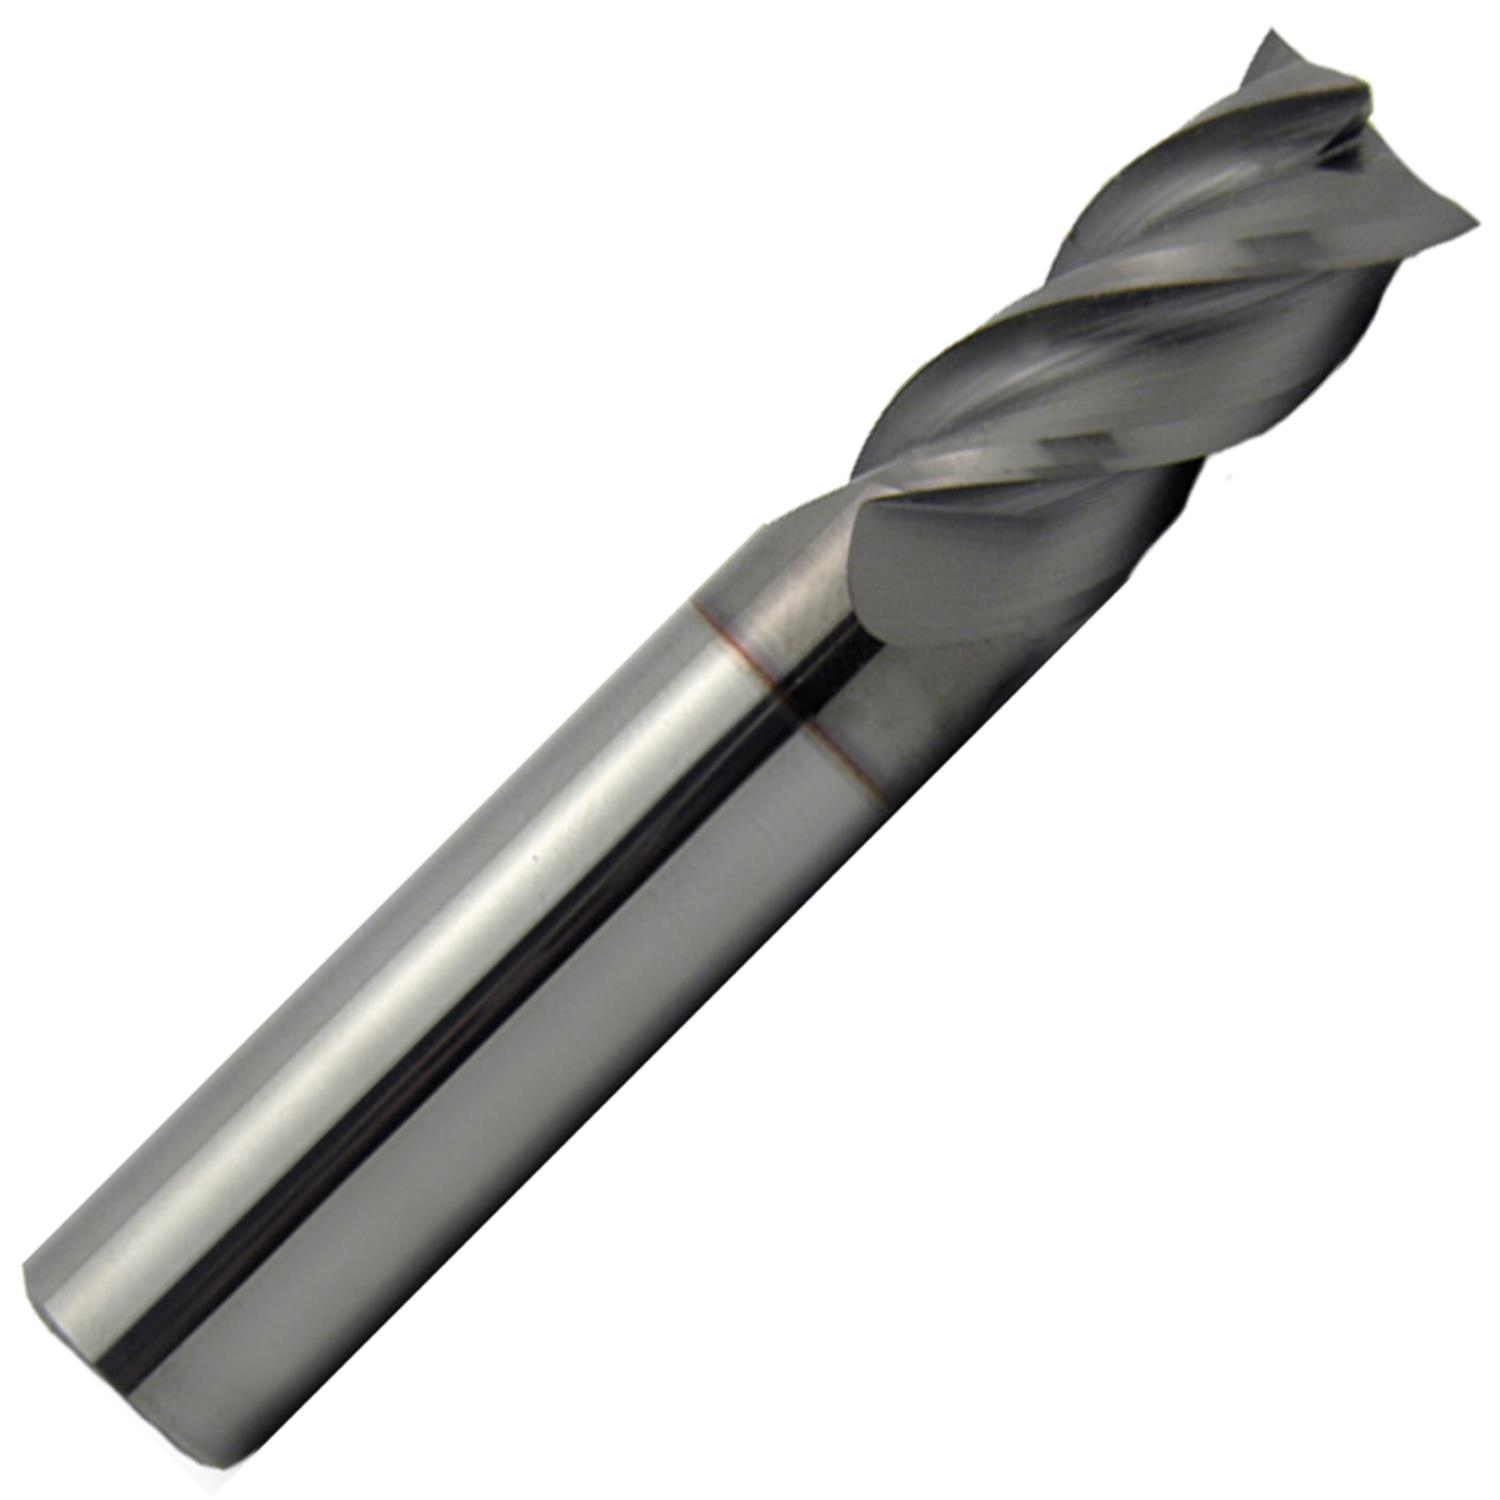 3/16" Diameter 4 Flute Single End Carbide End Mill 40° Degree Helix Stub TiCN Coated,3/8" Length of Cut, 3/16" Shank, 1-1/2"OAL - image 1 of 1